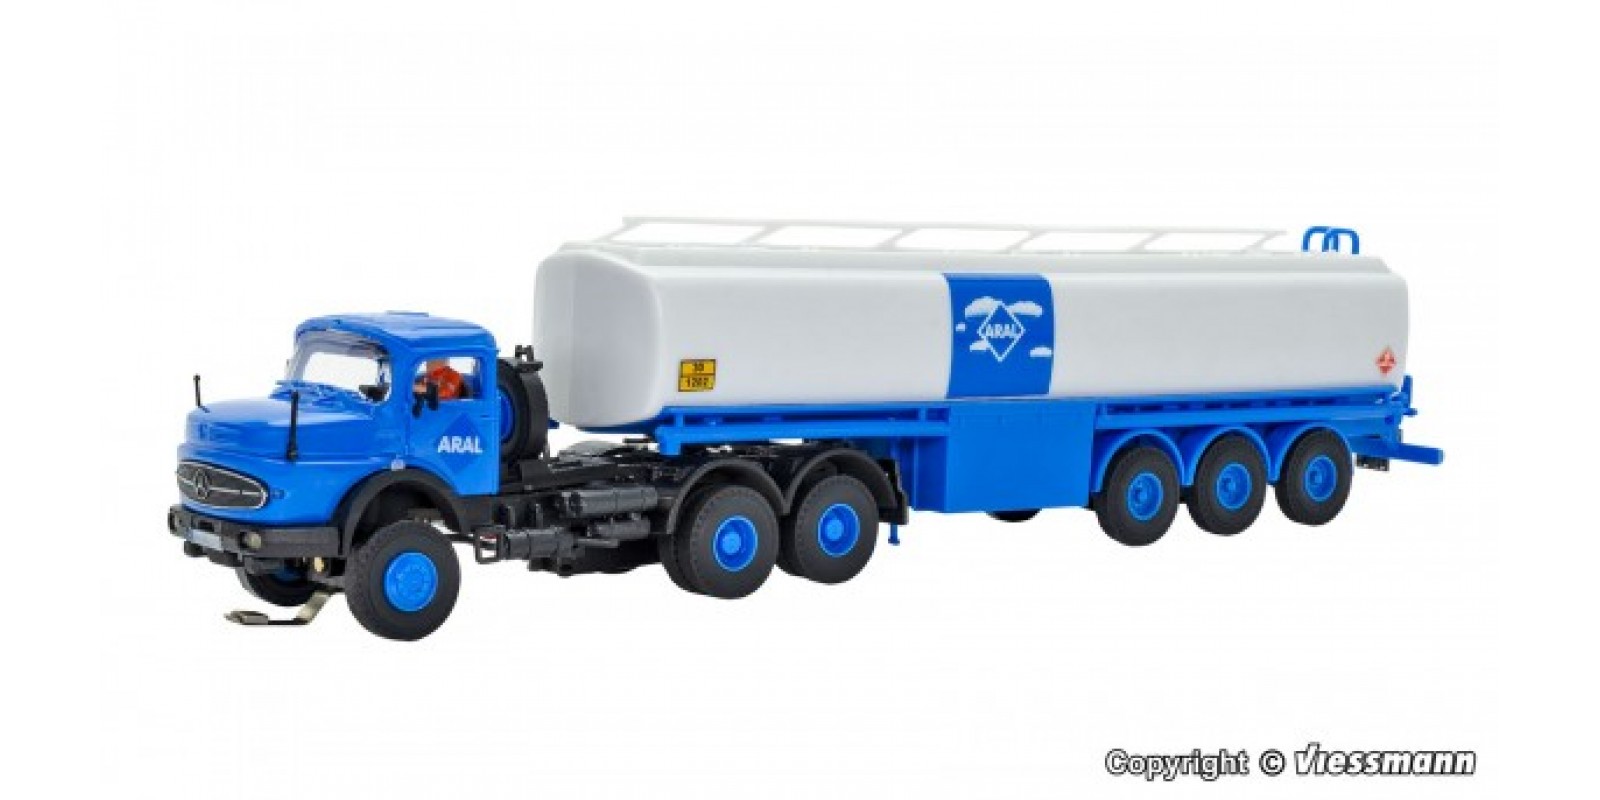 VI8034 H0 MB round bonnet 3-axle with ARAL tanker semitrailer, basic, functional model